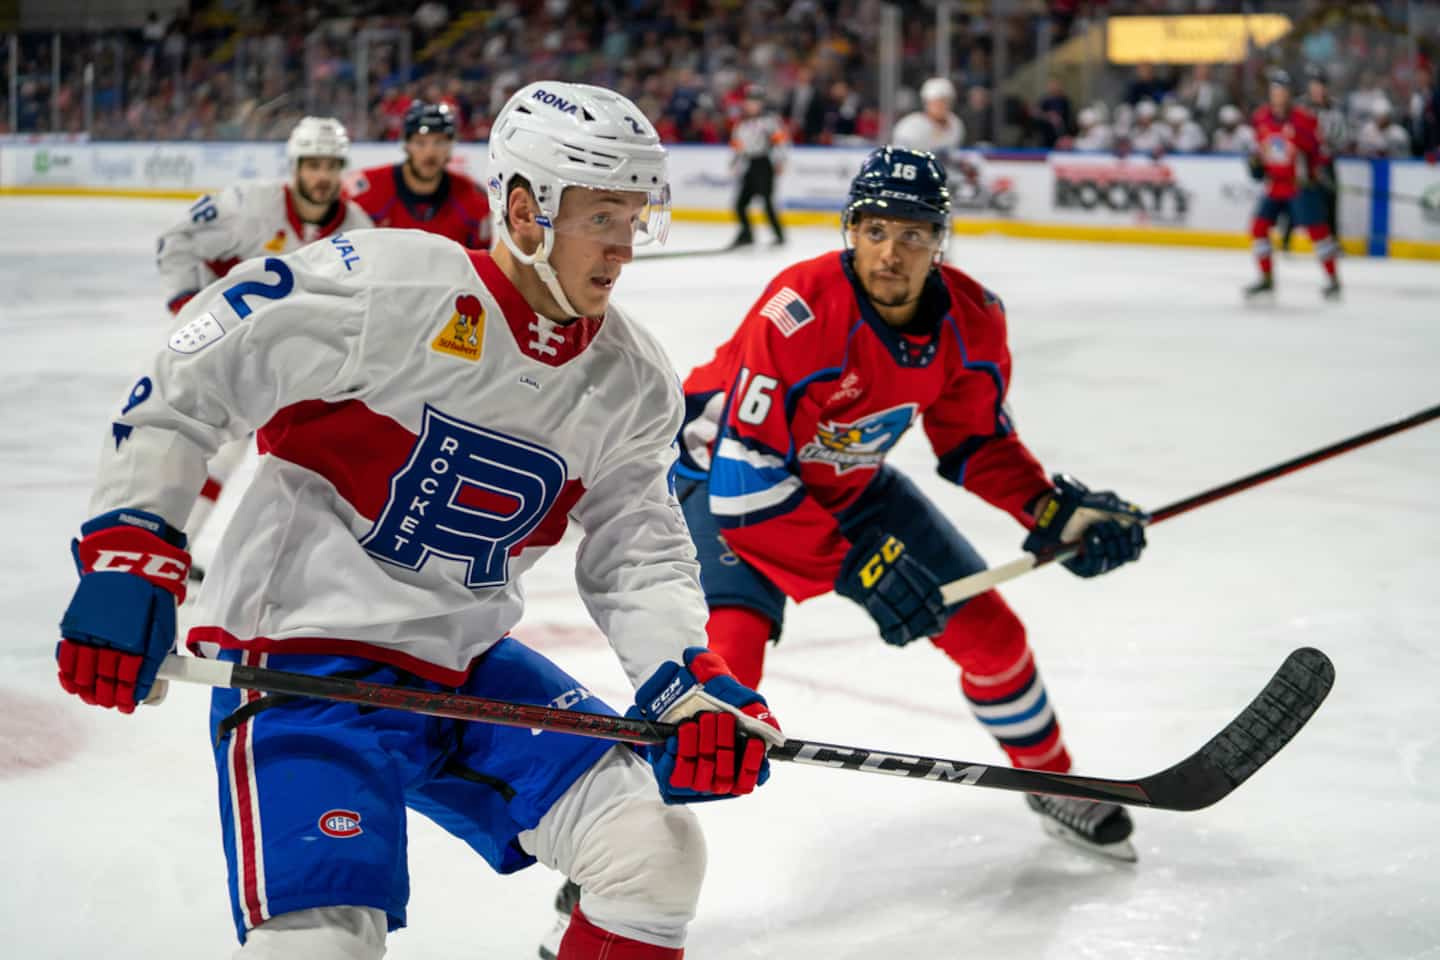 American League: the course of the Laval Rocket comes to an end